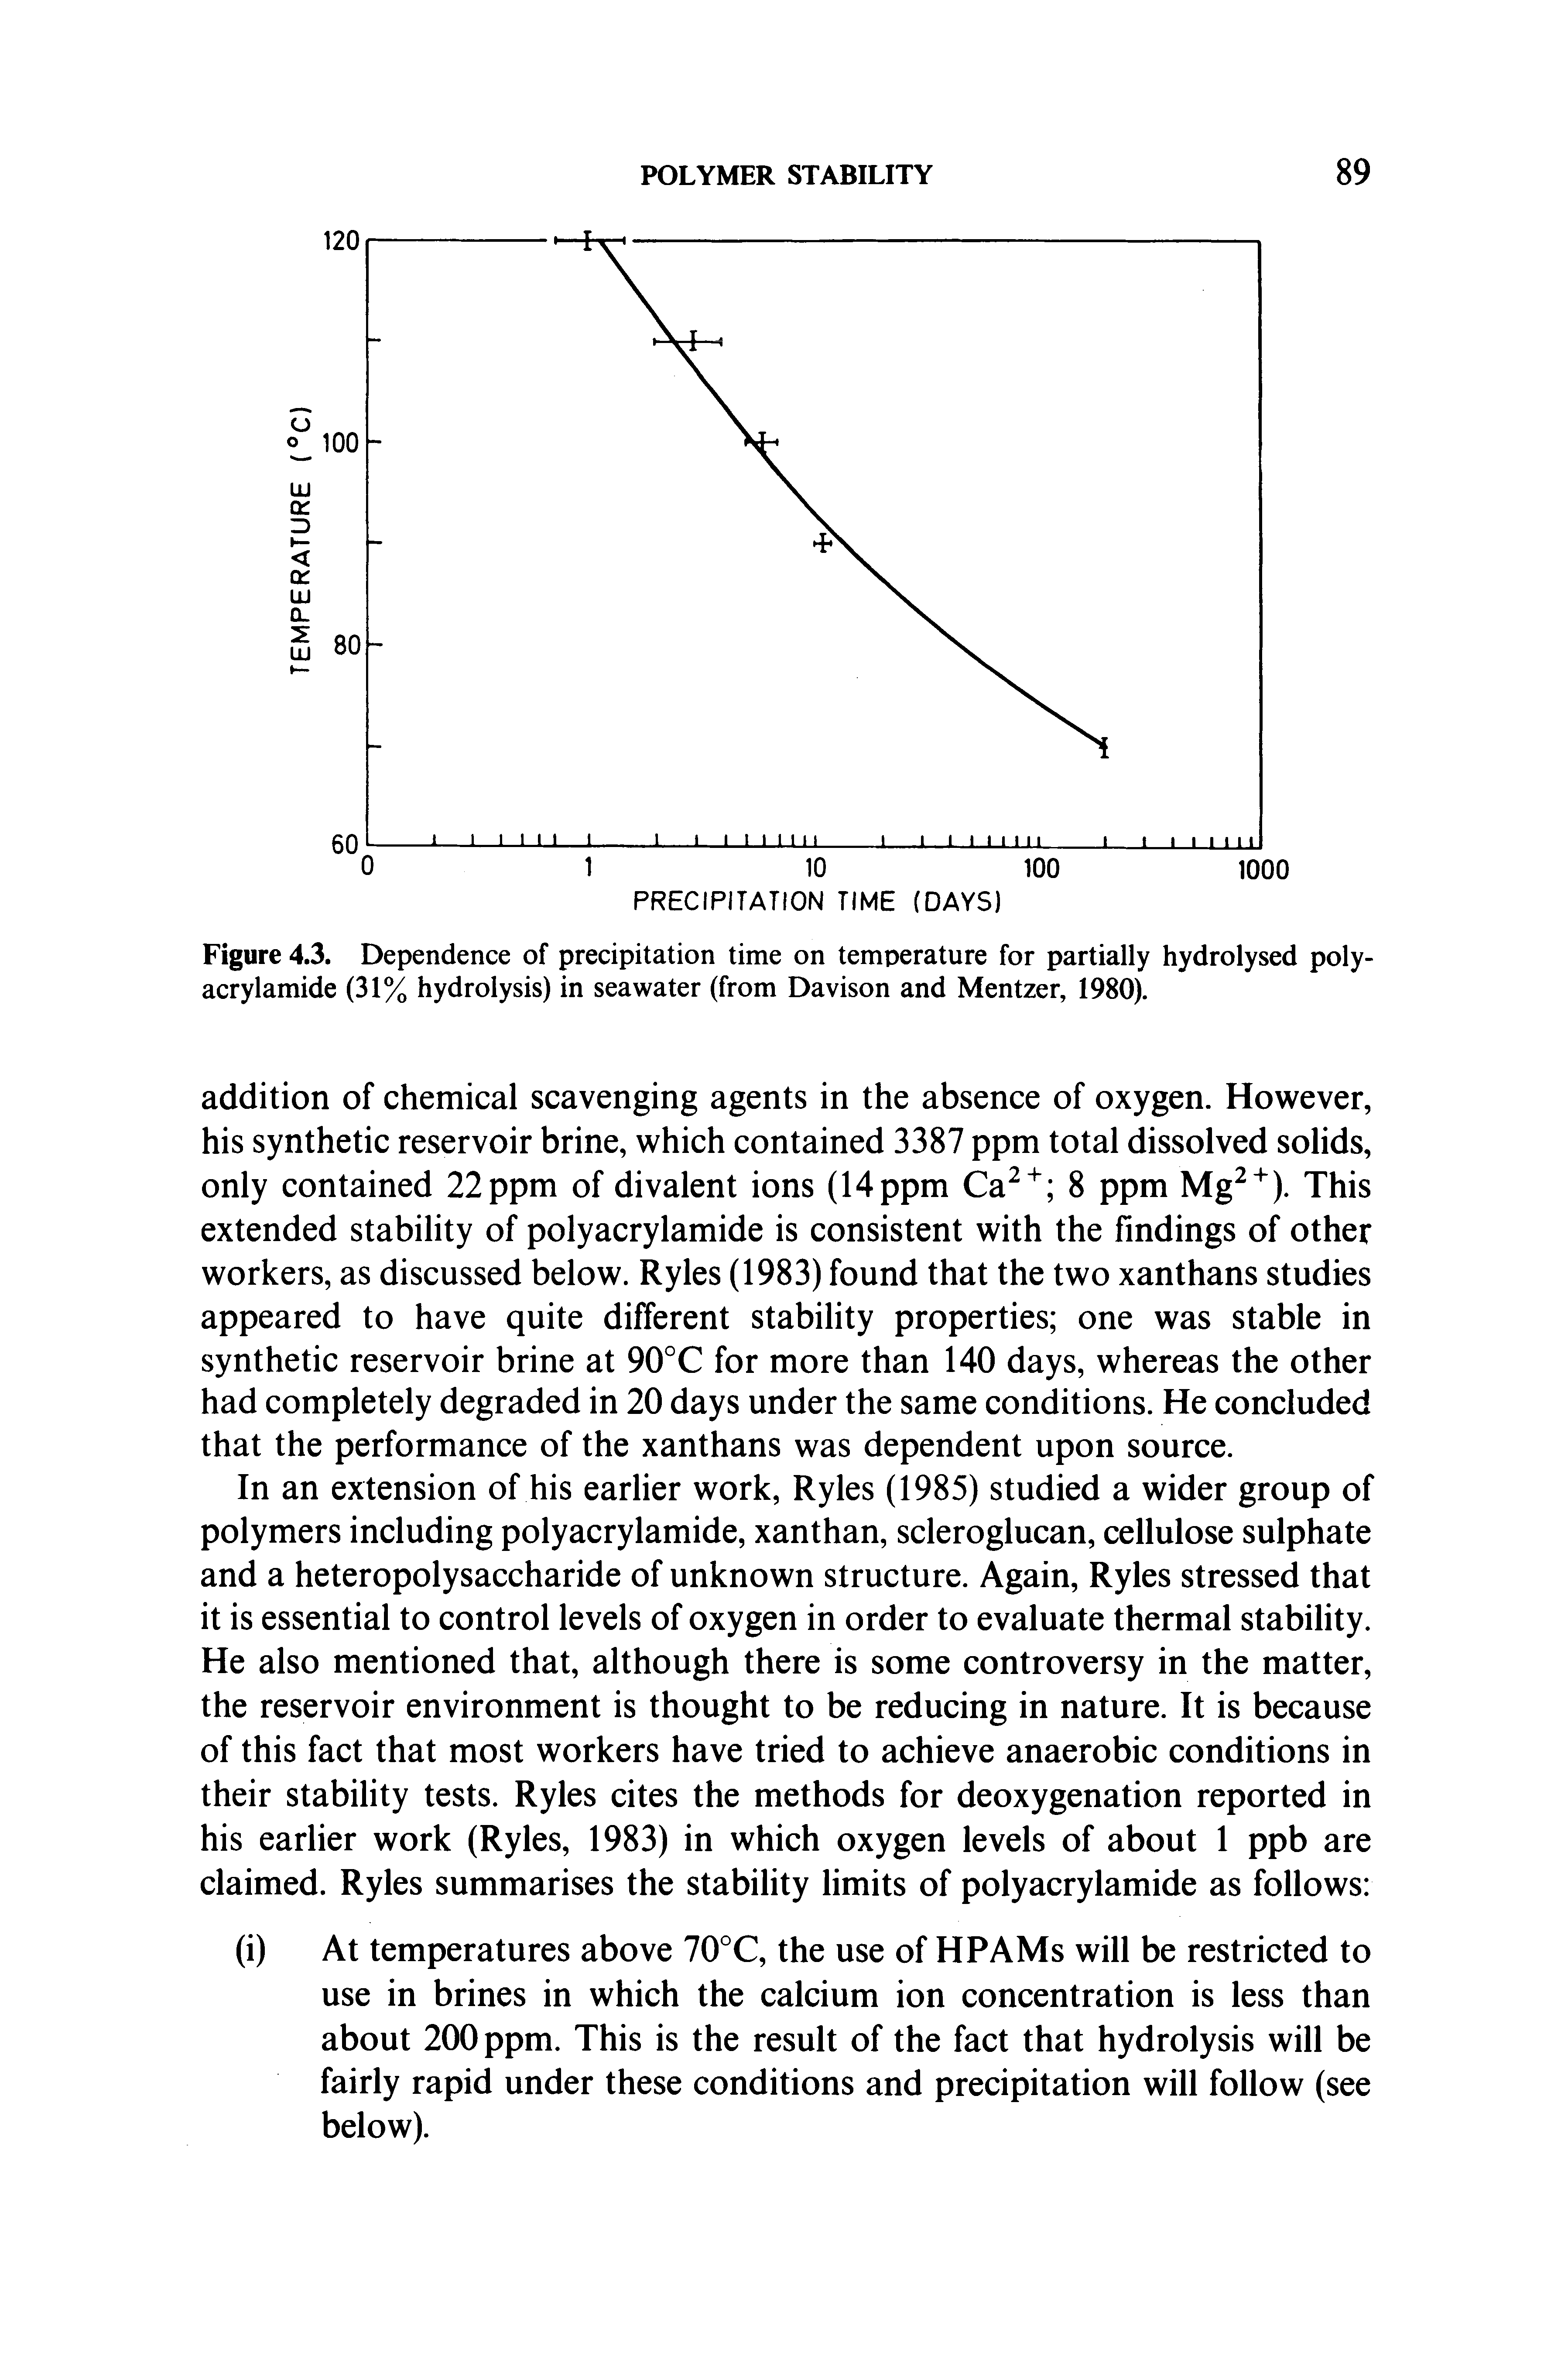 Figure 4.3. Dependence of precipitation time on temperature for partially hydrolysed polyacrylamide (31% hydrolysis) in seawater (from Davison and Mentzer, 1980).